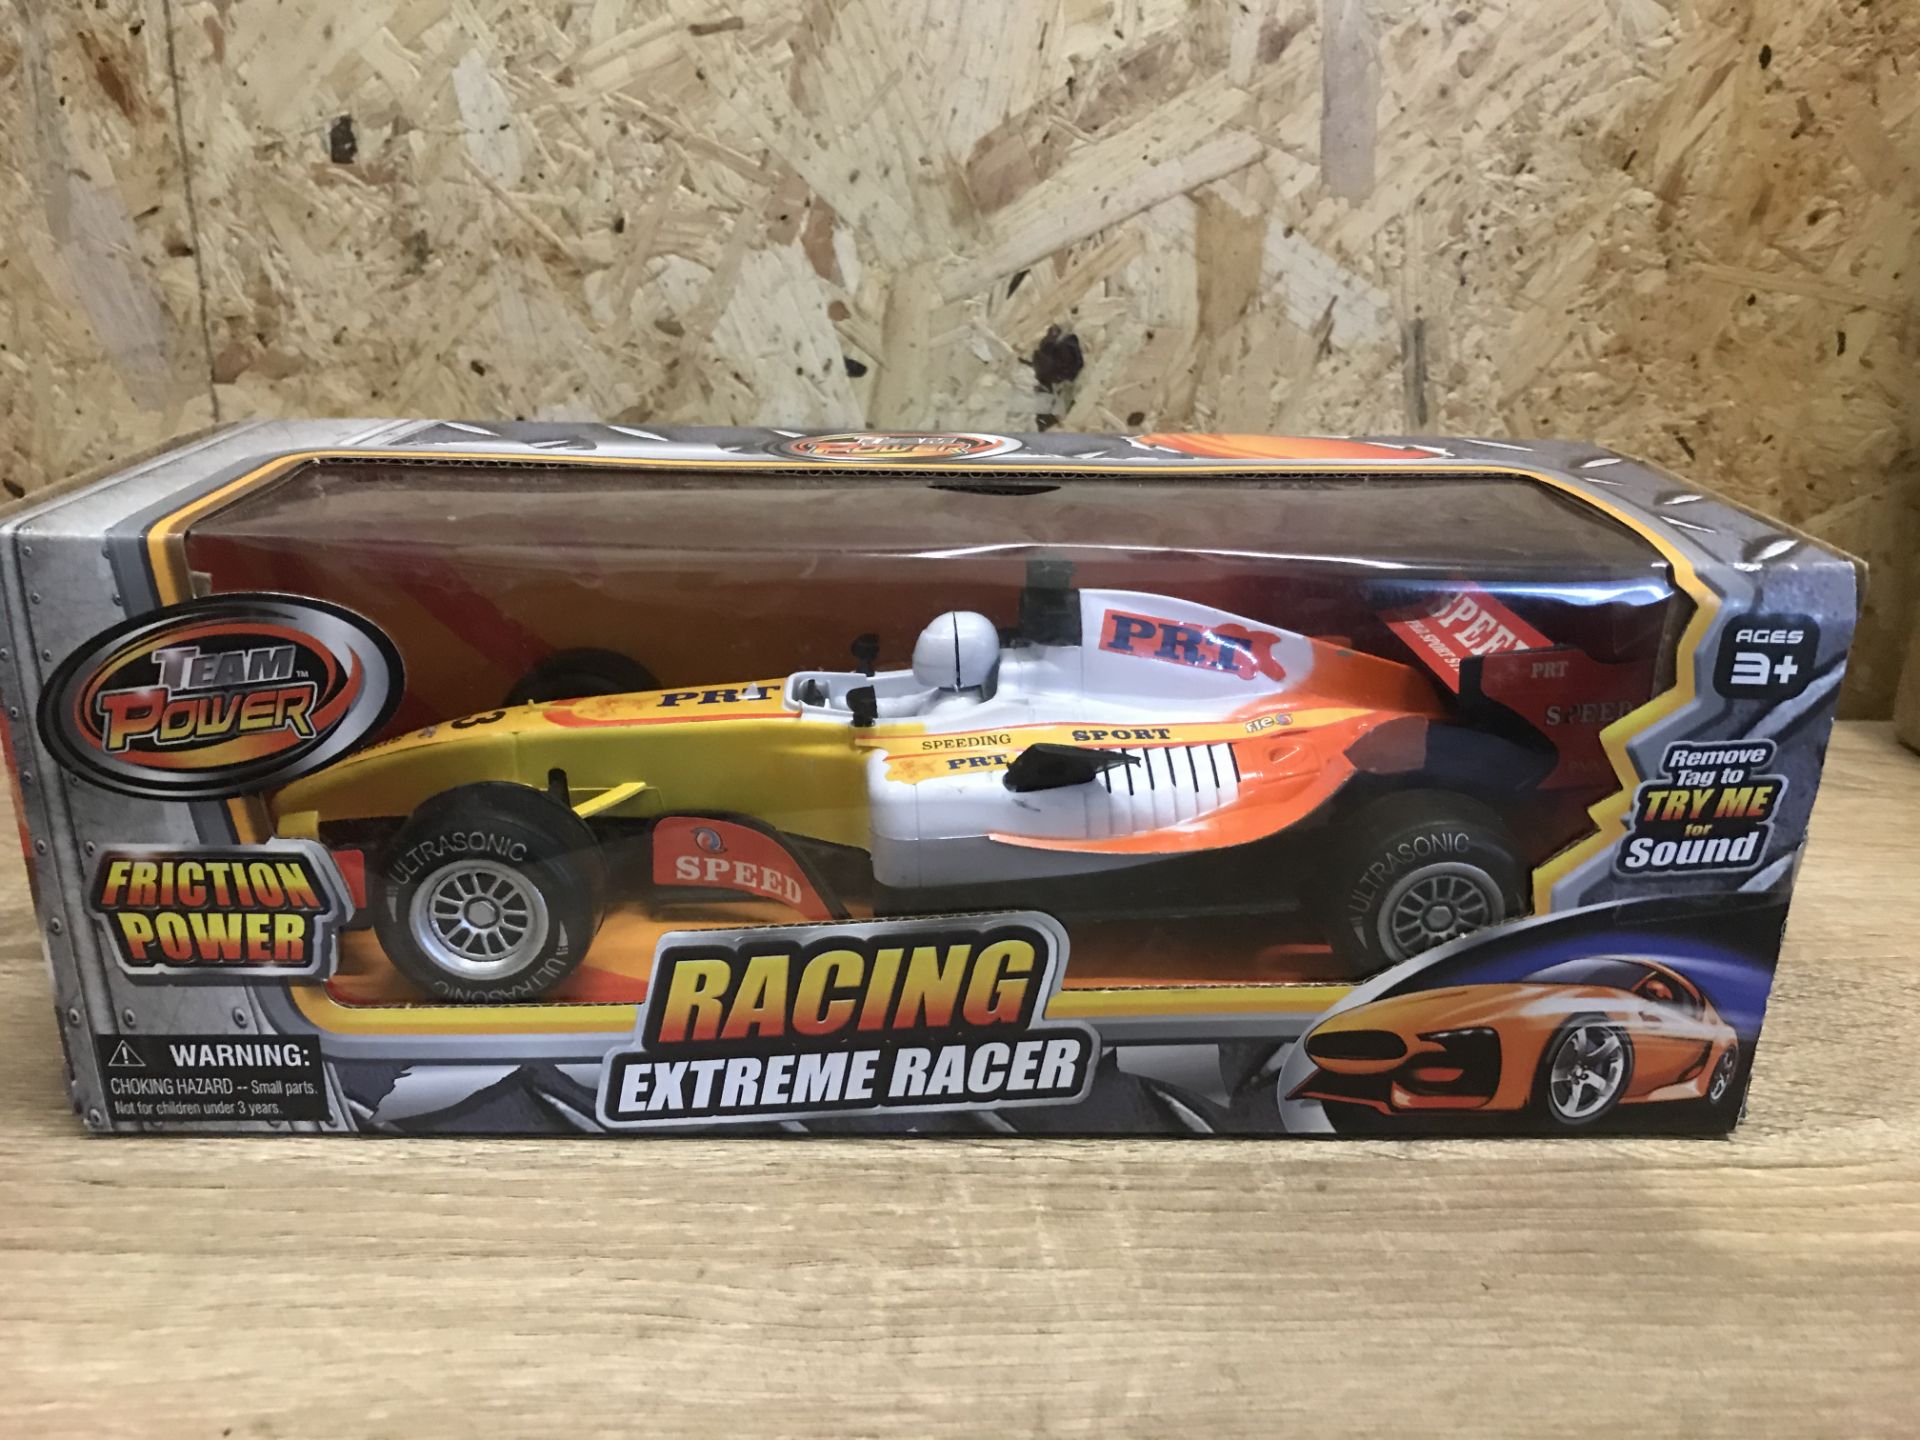 24 x BRAND NEW BOXED TEAM POWER EXTREME RACER - FRICTION POWER WITH SOUNDS. RRP £14.99 EACH